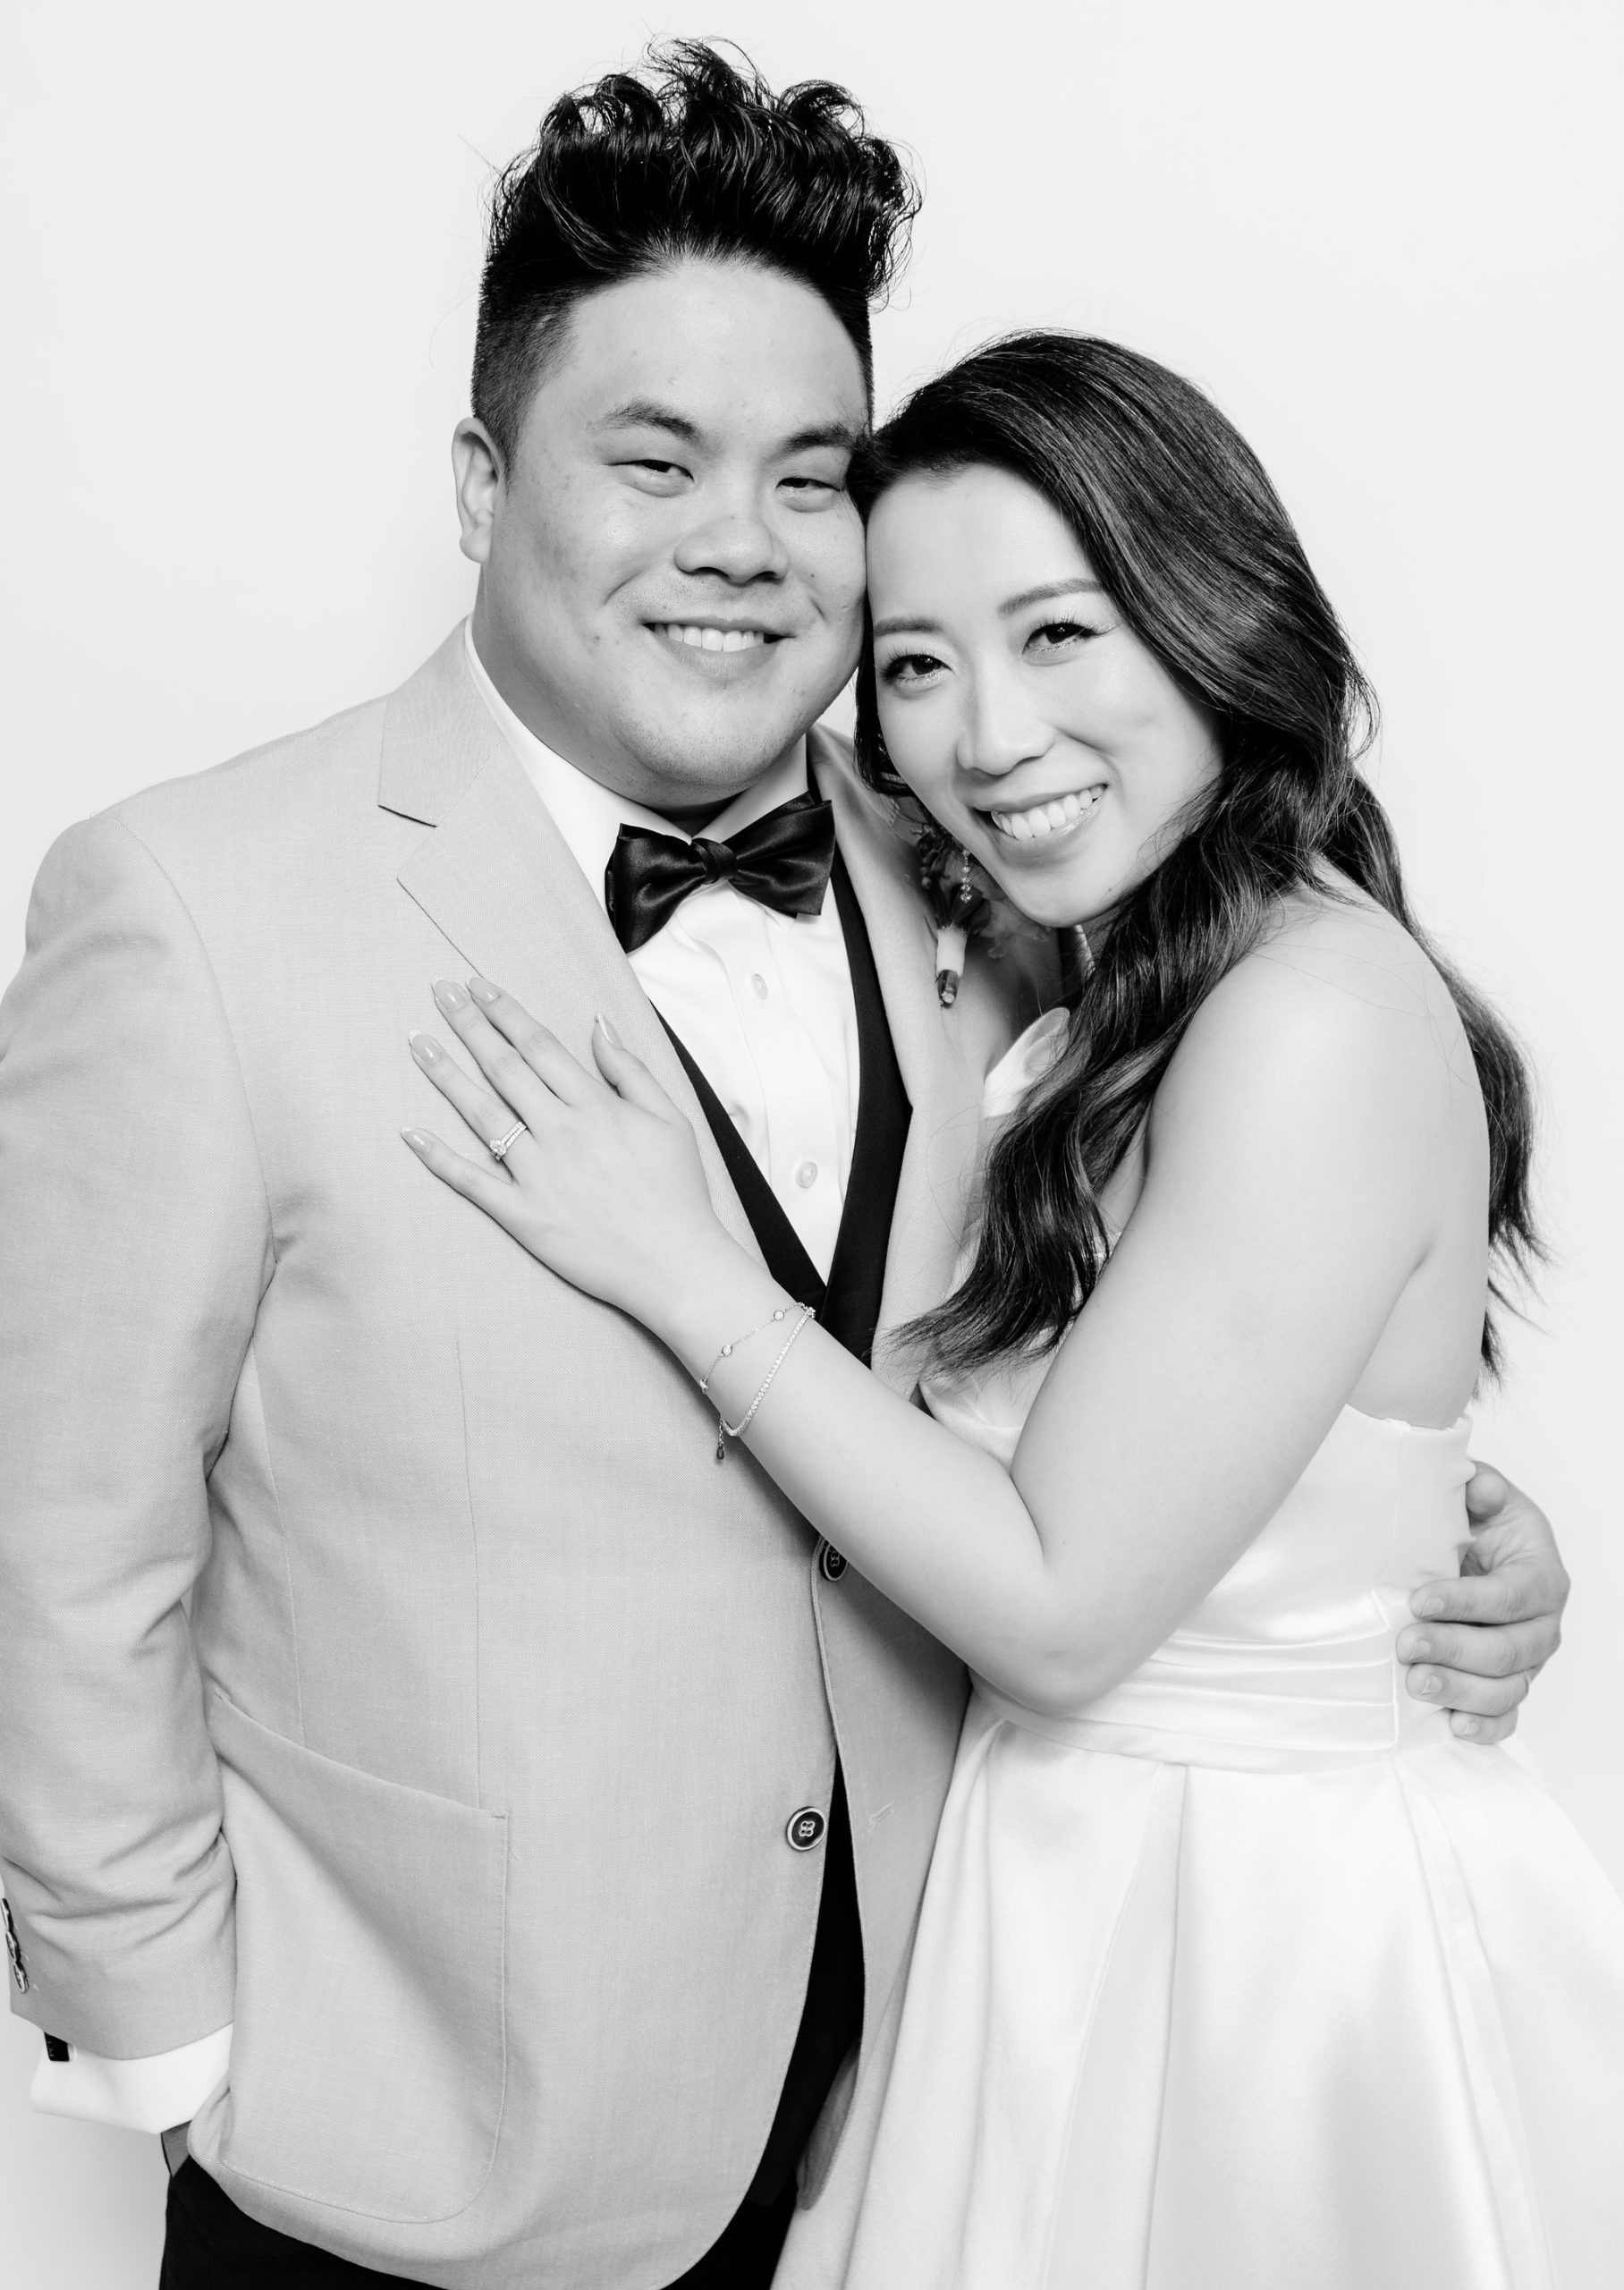 Studio Photo of Bride and Groom in Black and White.